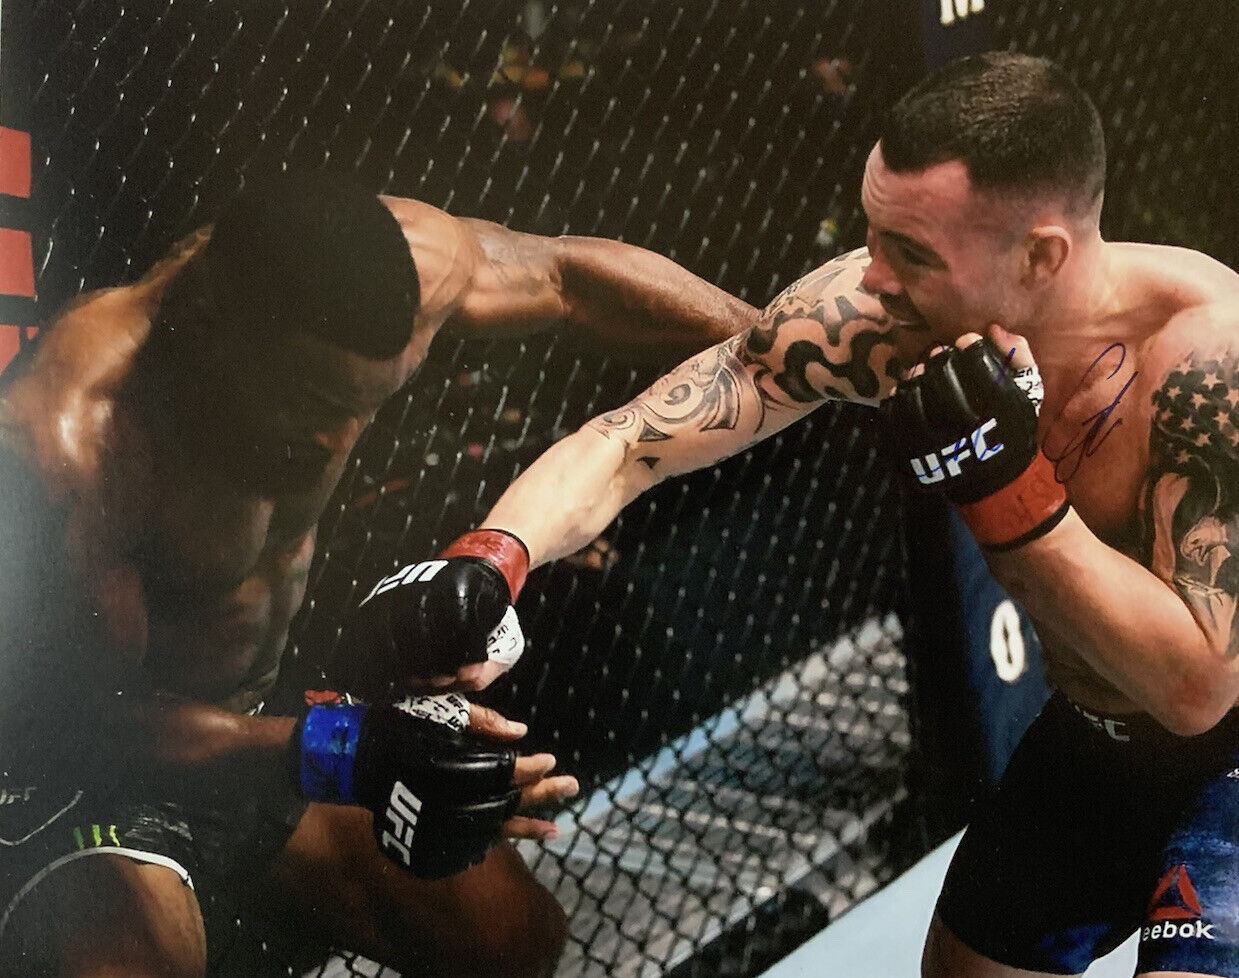 COLBY COVINGTON HAND SIGNED 8x10 Photo Poster painting UFC FIGHTER RARE AUTHENTIC AUTOGRAPH